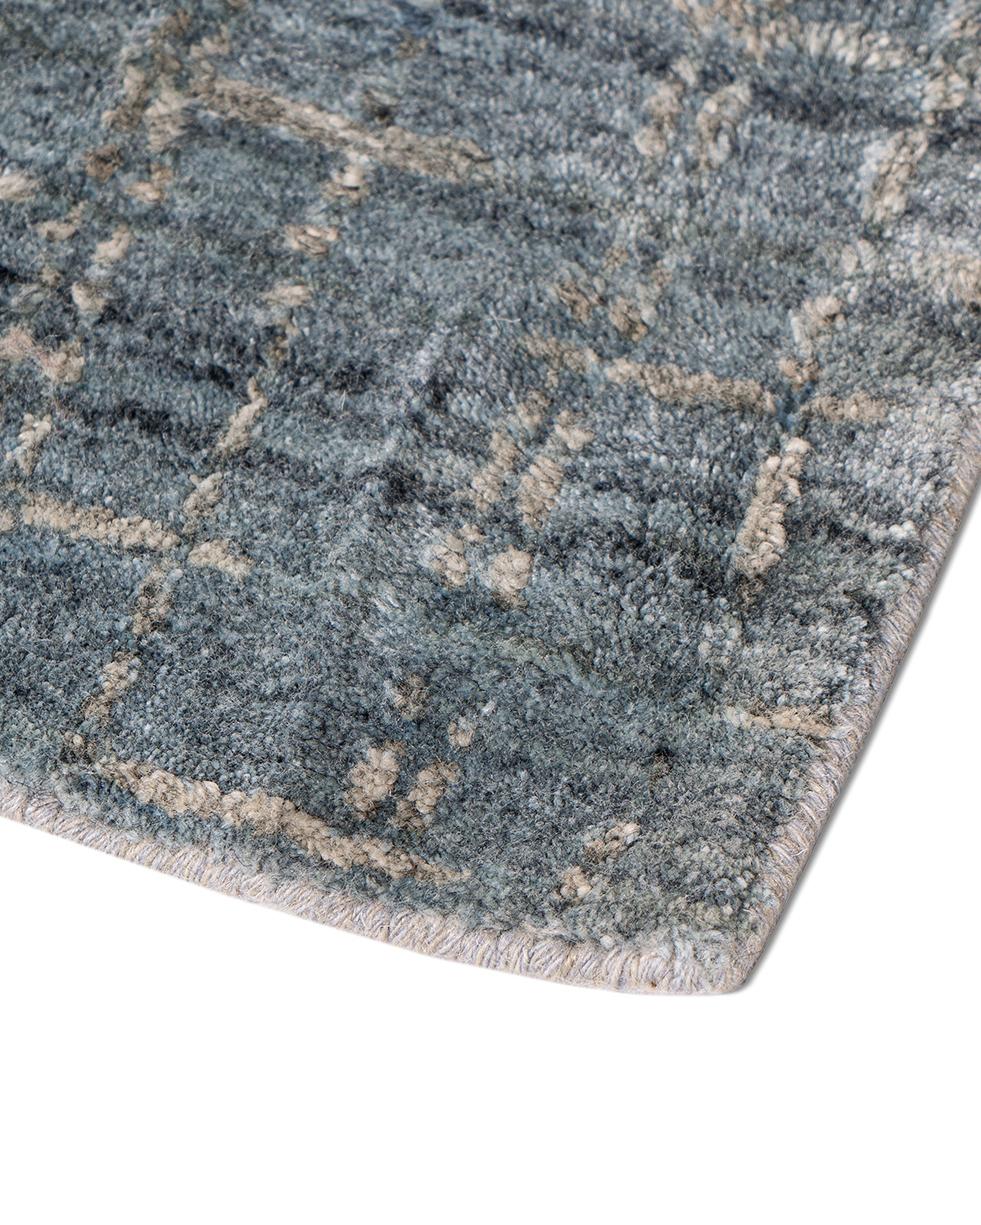 Simplicity blue gray contemporary handwoven area rug, 10' x 14'. This contemporary wool & viscose rug has a luxury firm mid height pile and creates a soft and relaxing look to any setting. Colors: Blue/gray.